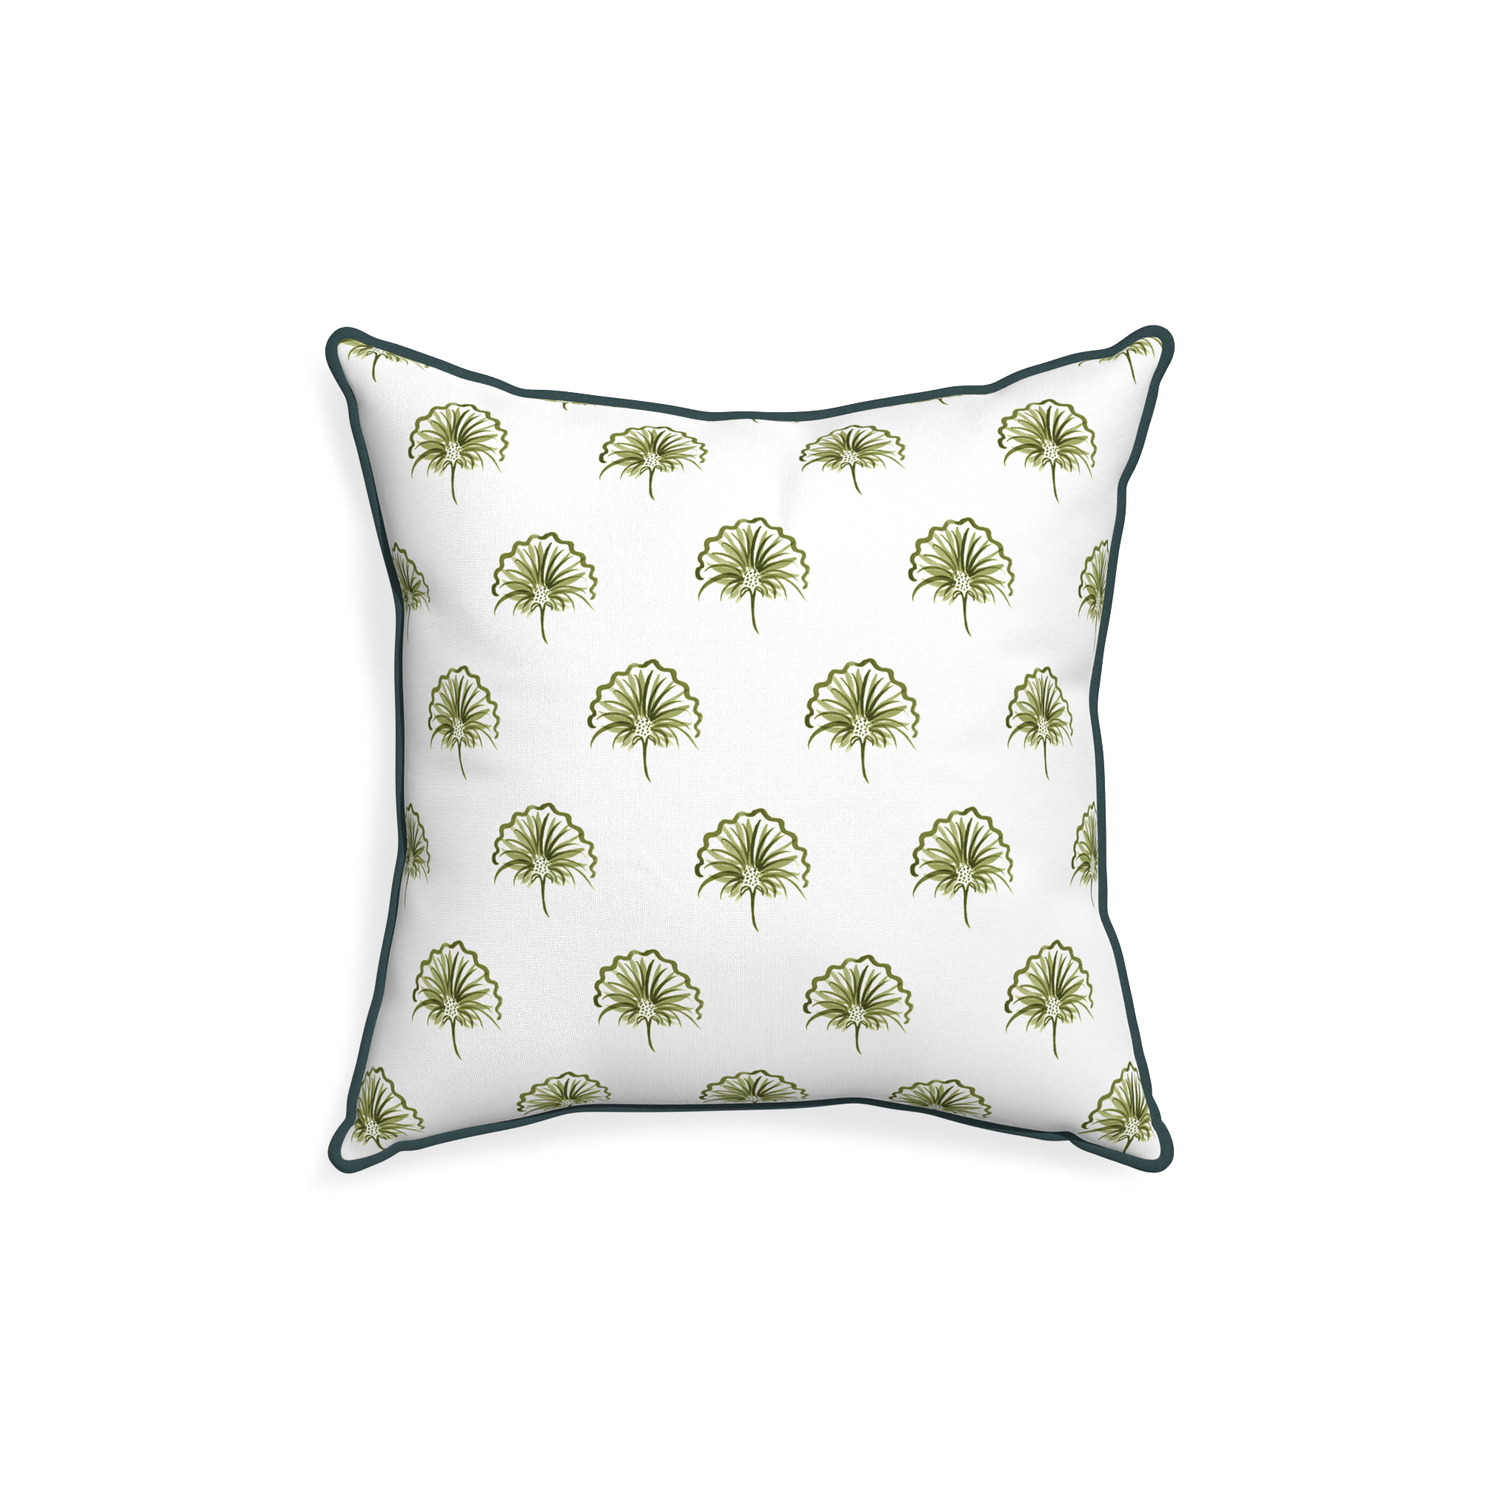 18-square penelope moss custom green floralpillow with p piping on white background